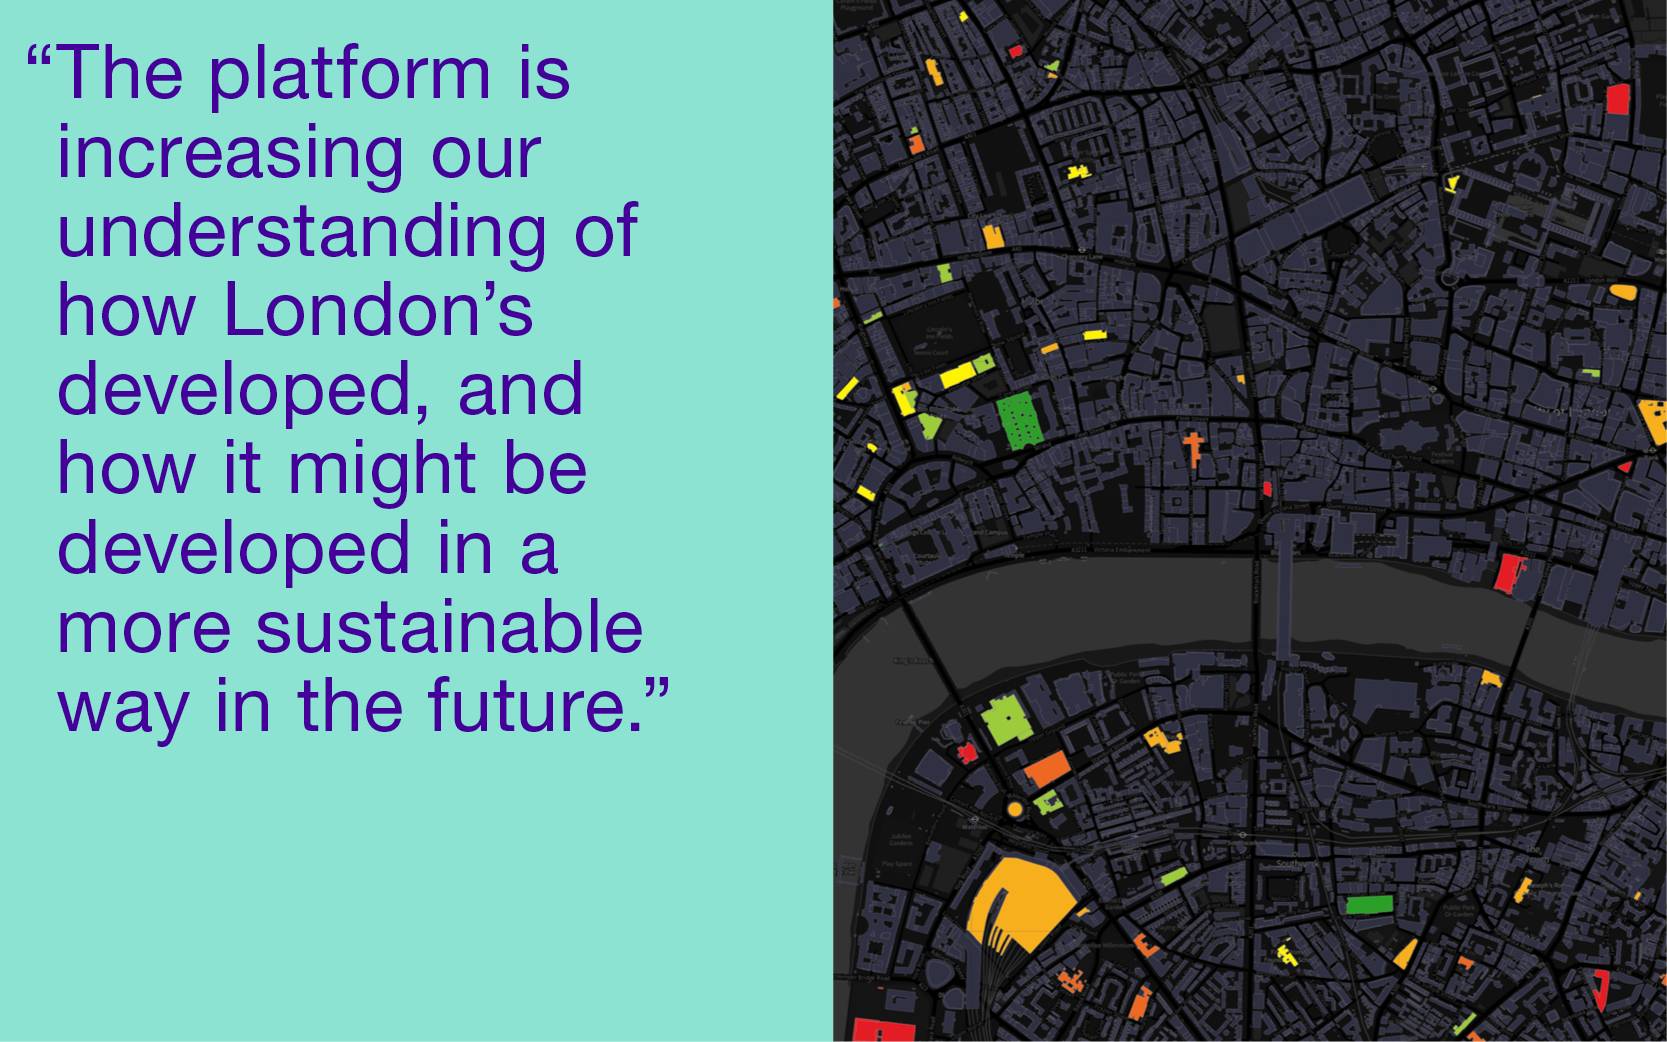 “The platform is increasing our understanding of how London’s developed, and how it might be developed in a more sustainable way in the future.”